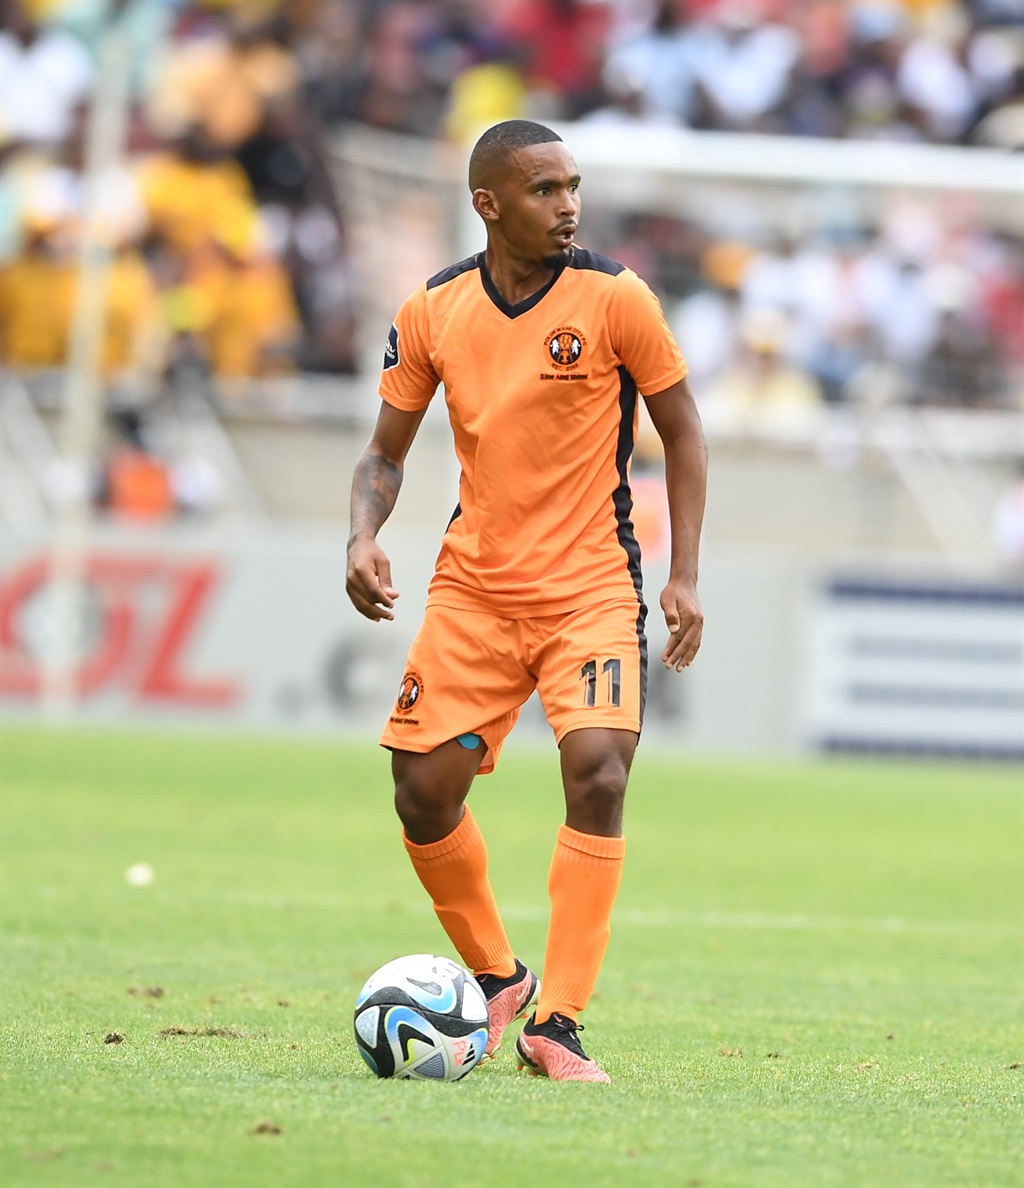 POLOKWANE, SOUTH AFRICA - DECEMBER 09: Oswin Appollis of Polokwane City during the DStv Premiership match between Polokwane City and Kaizer Chiefs at Peter Mokaba Stadium on December 09, 2023 in Polokwane, South Africa. (Photo by Philip Maeta/Gallo Images)